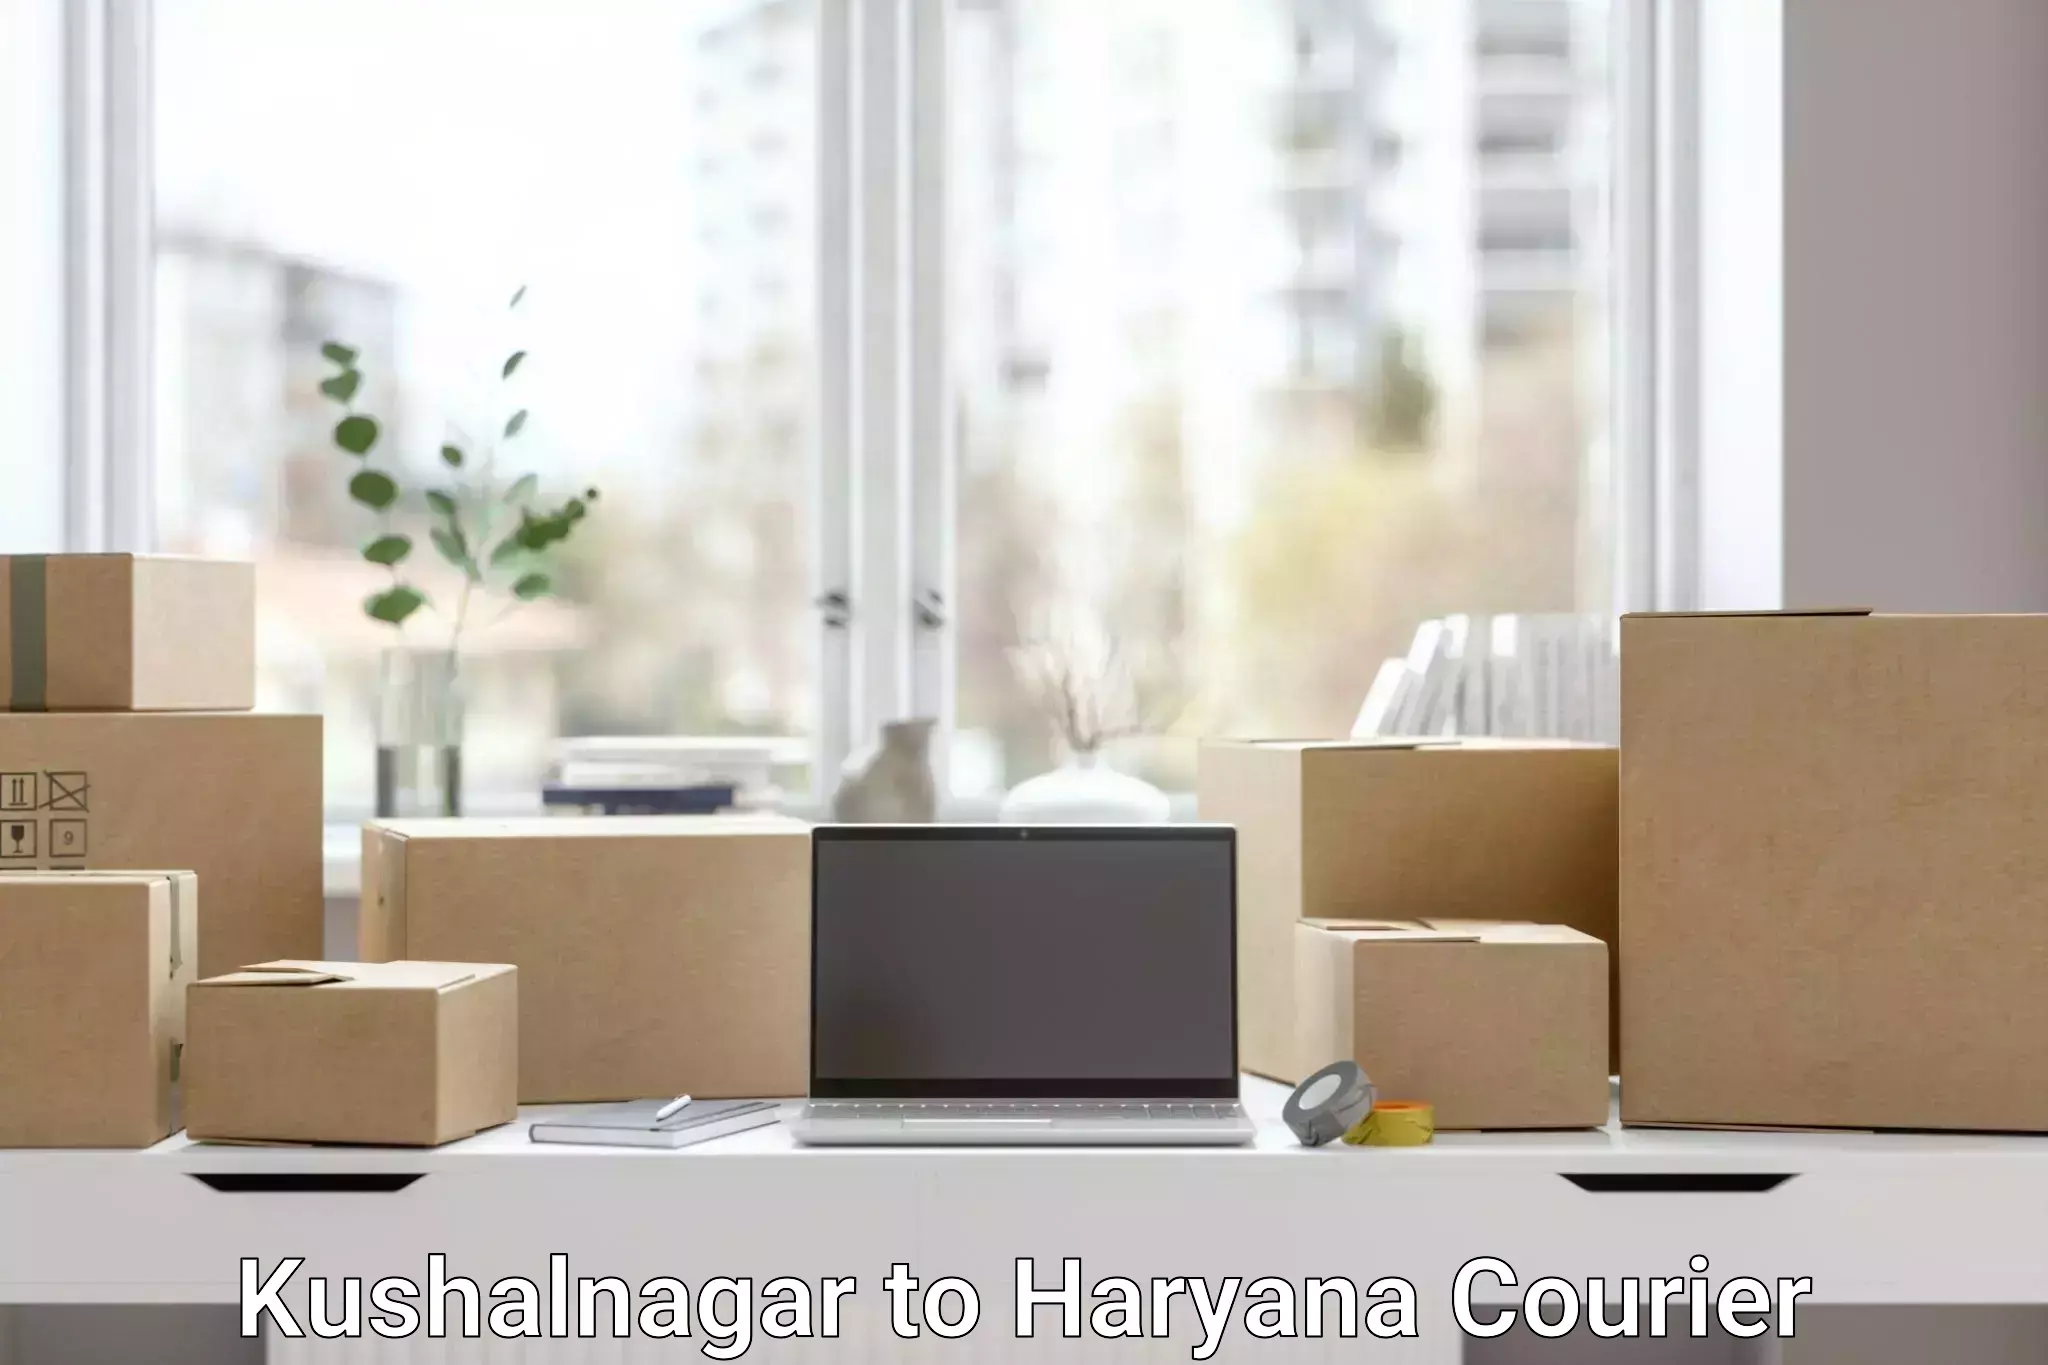 Easy access courier services Kushalnagar to Dharuhera